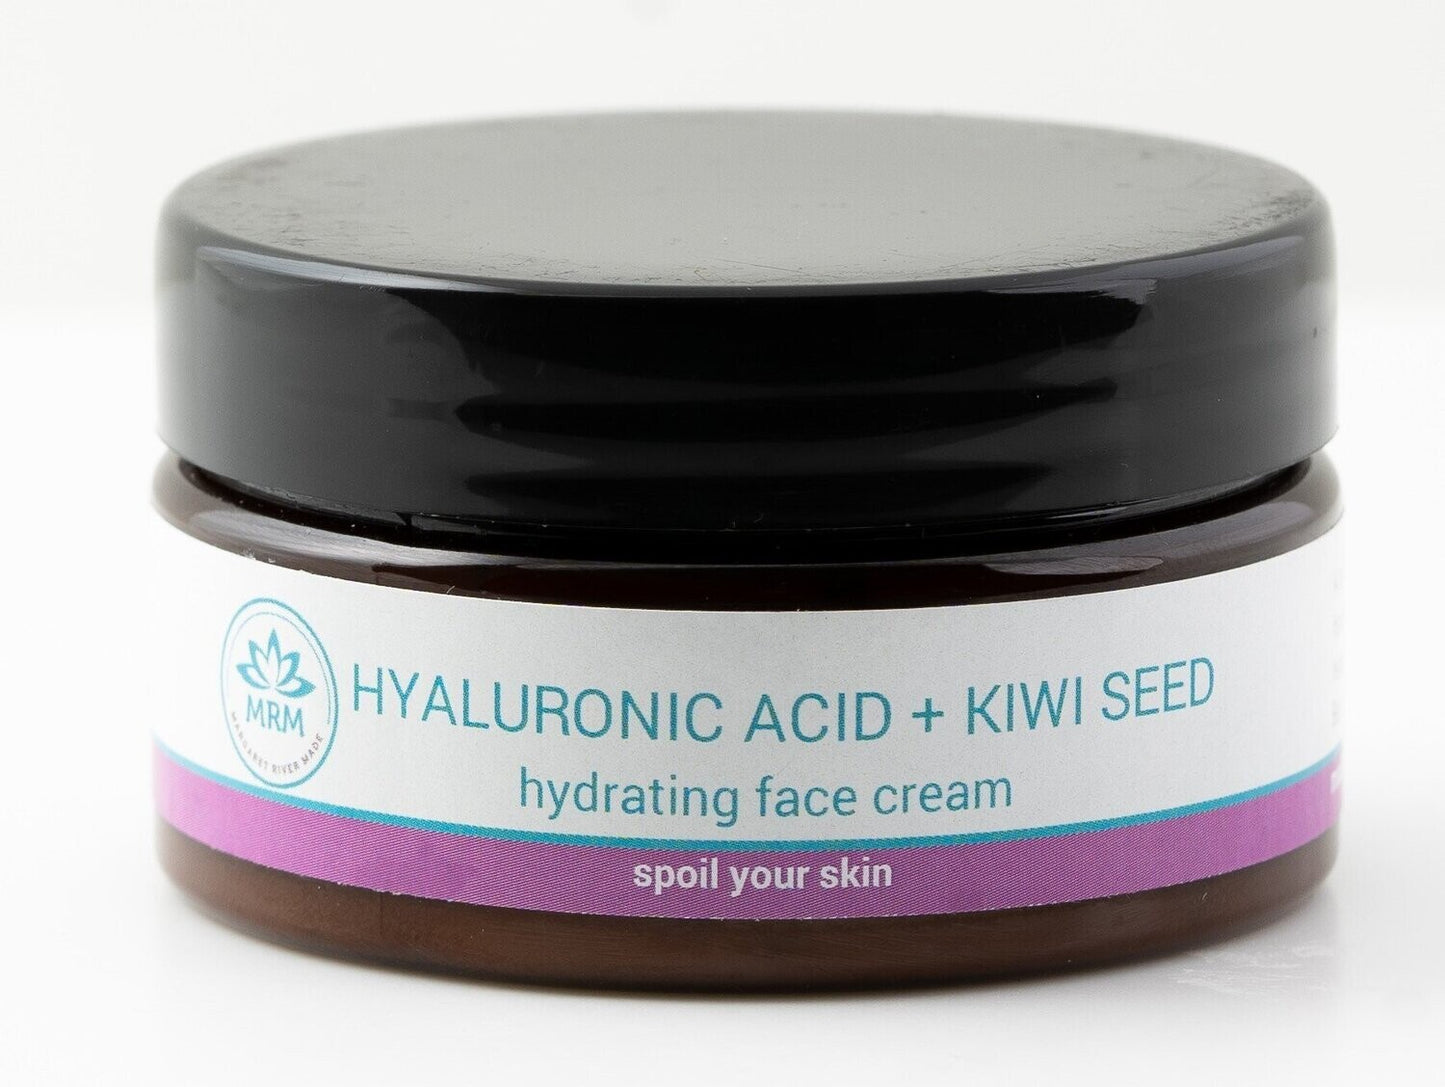 Margaret River Made Hyaluronic Acid + Kiwi Seed Hydrating Face Cream 50g